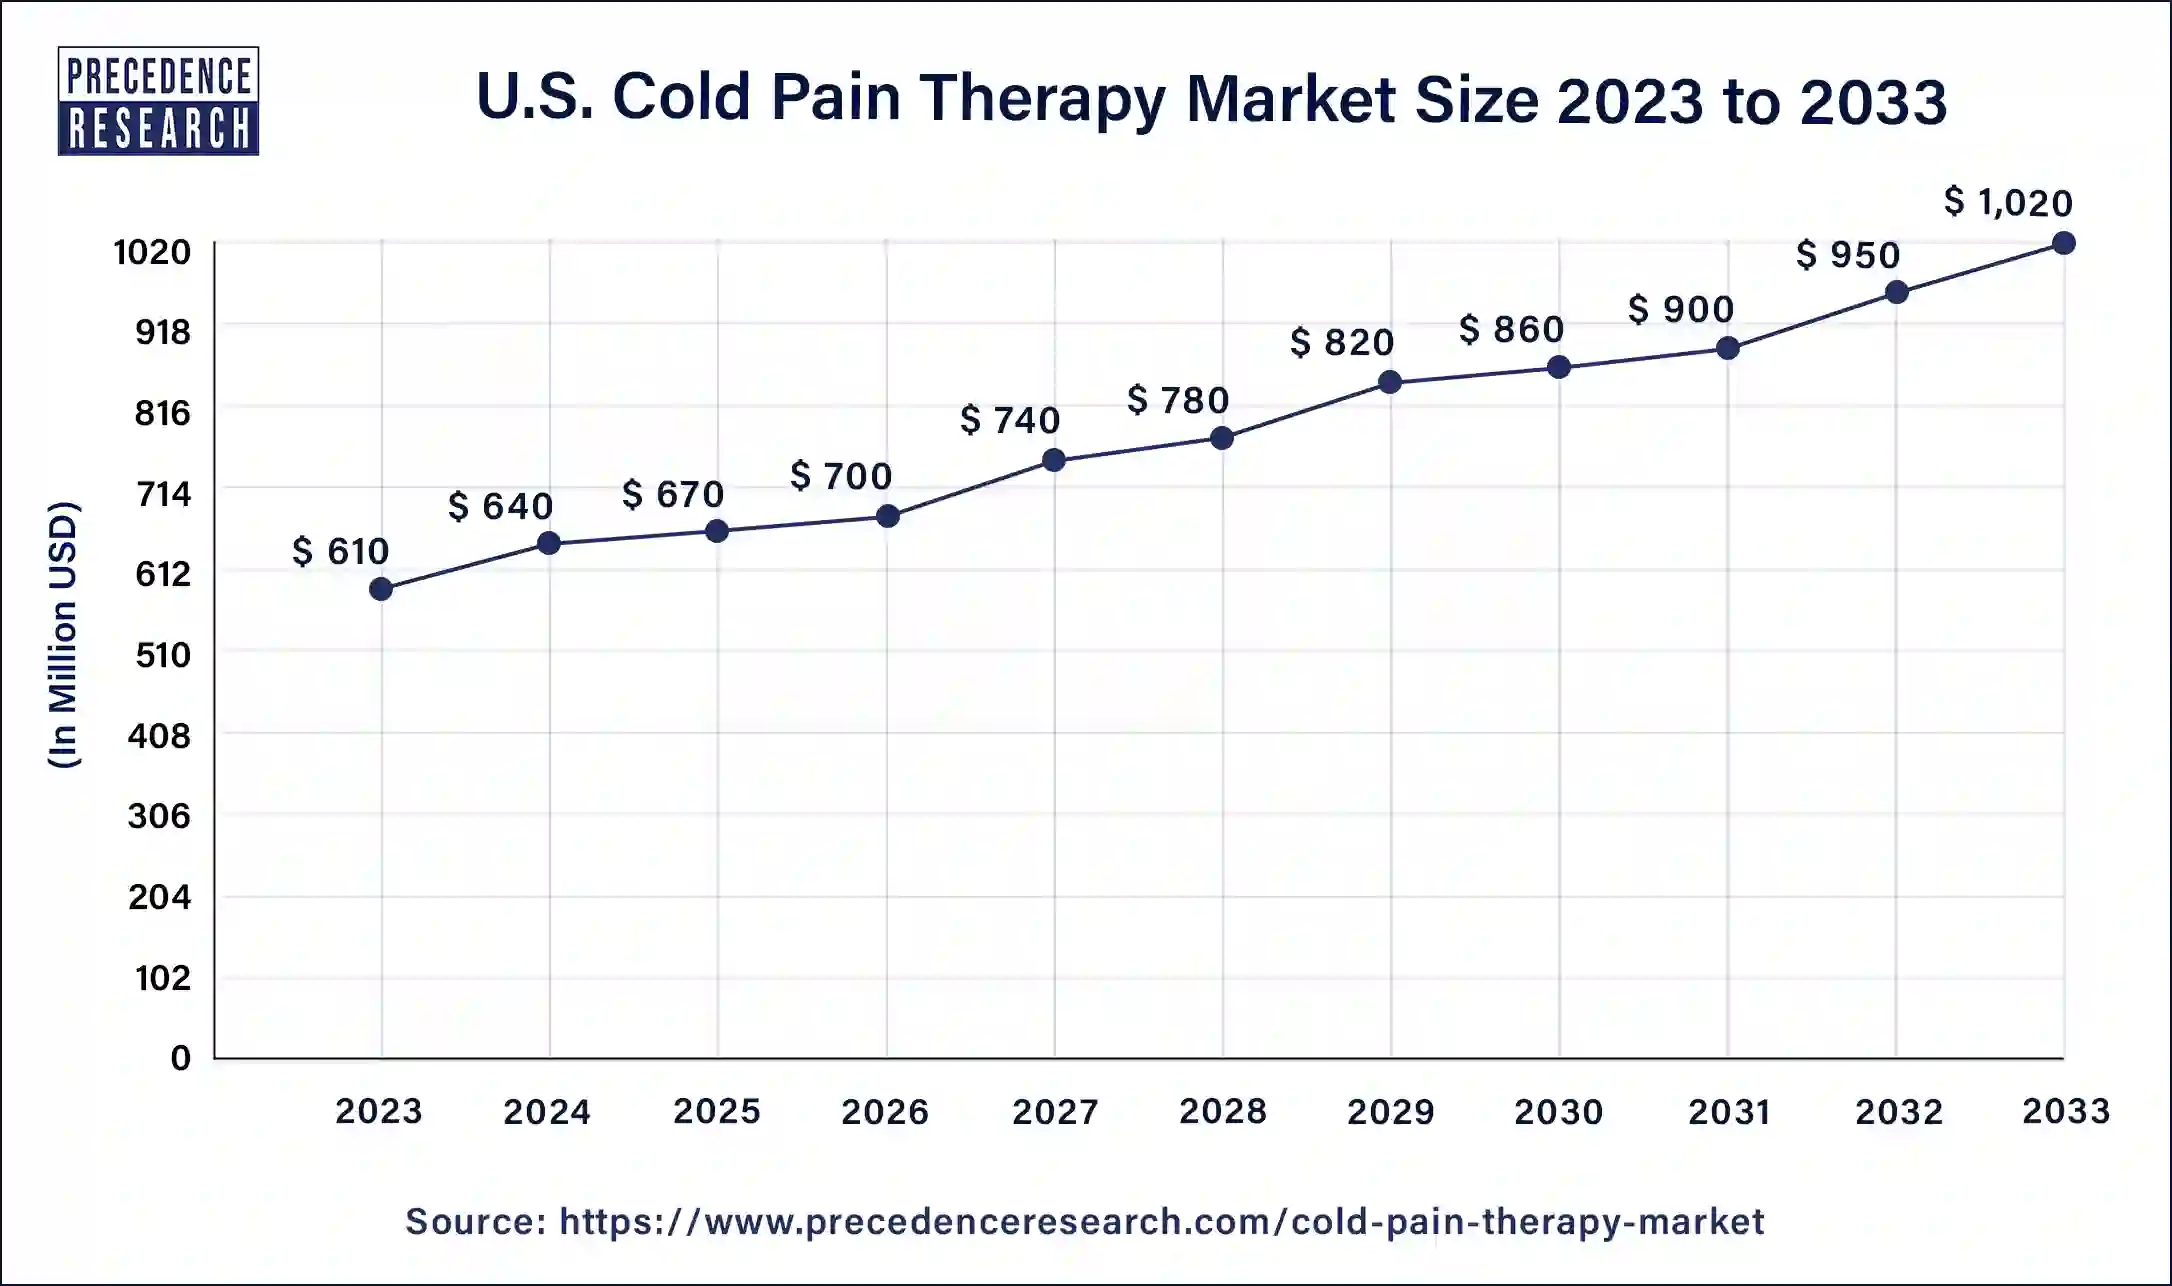 U.S. Cold Pain Therapy Market Size 2024 to 2033